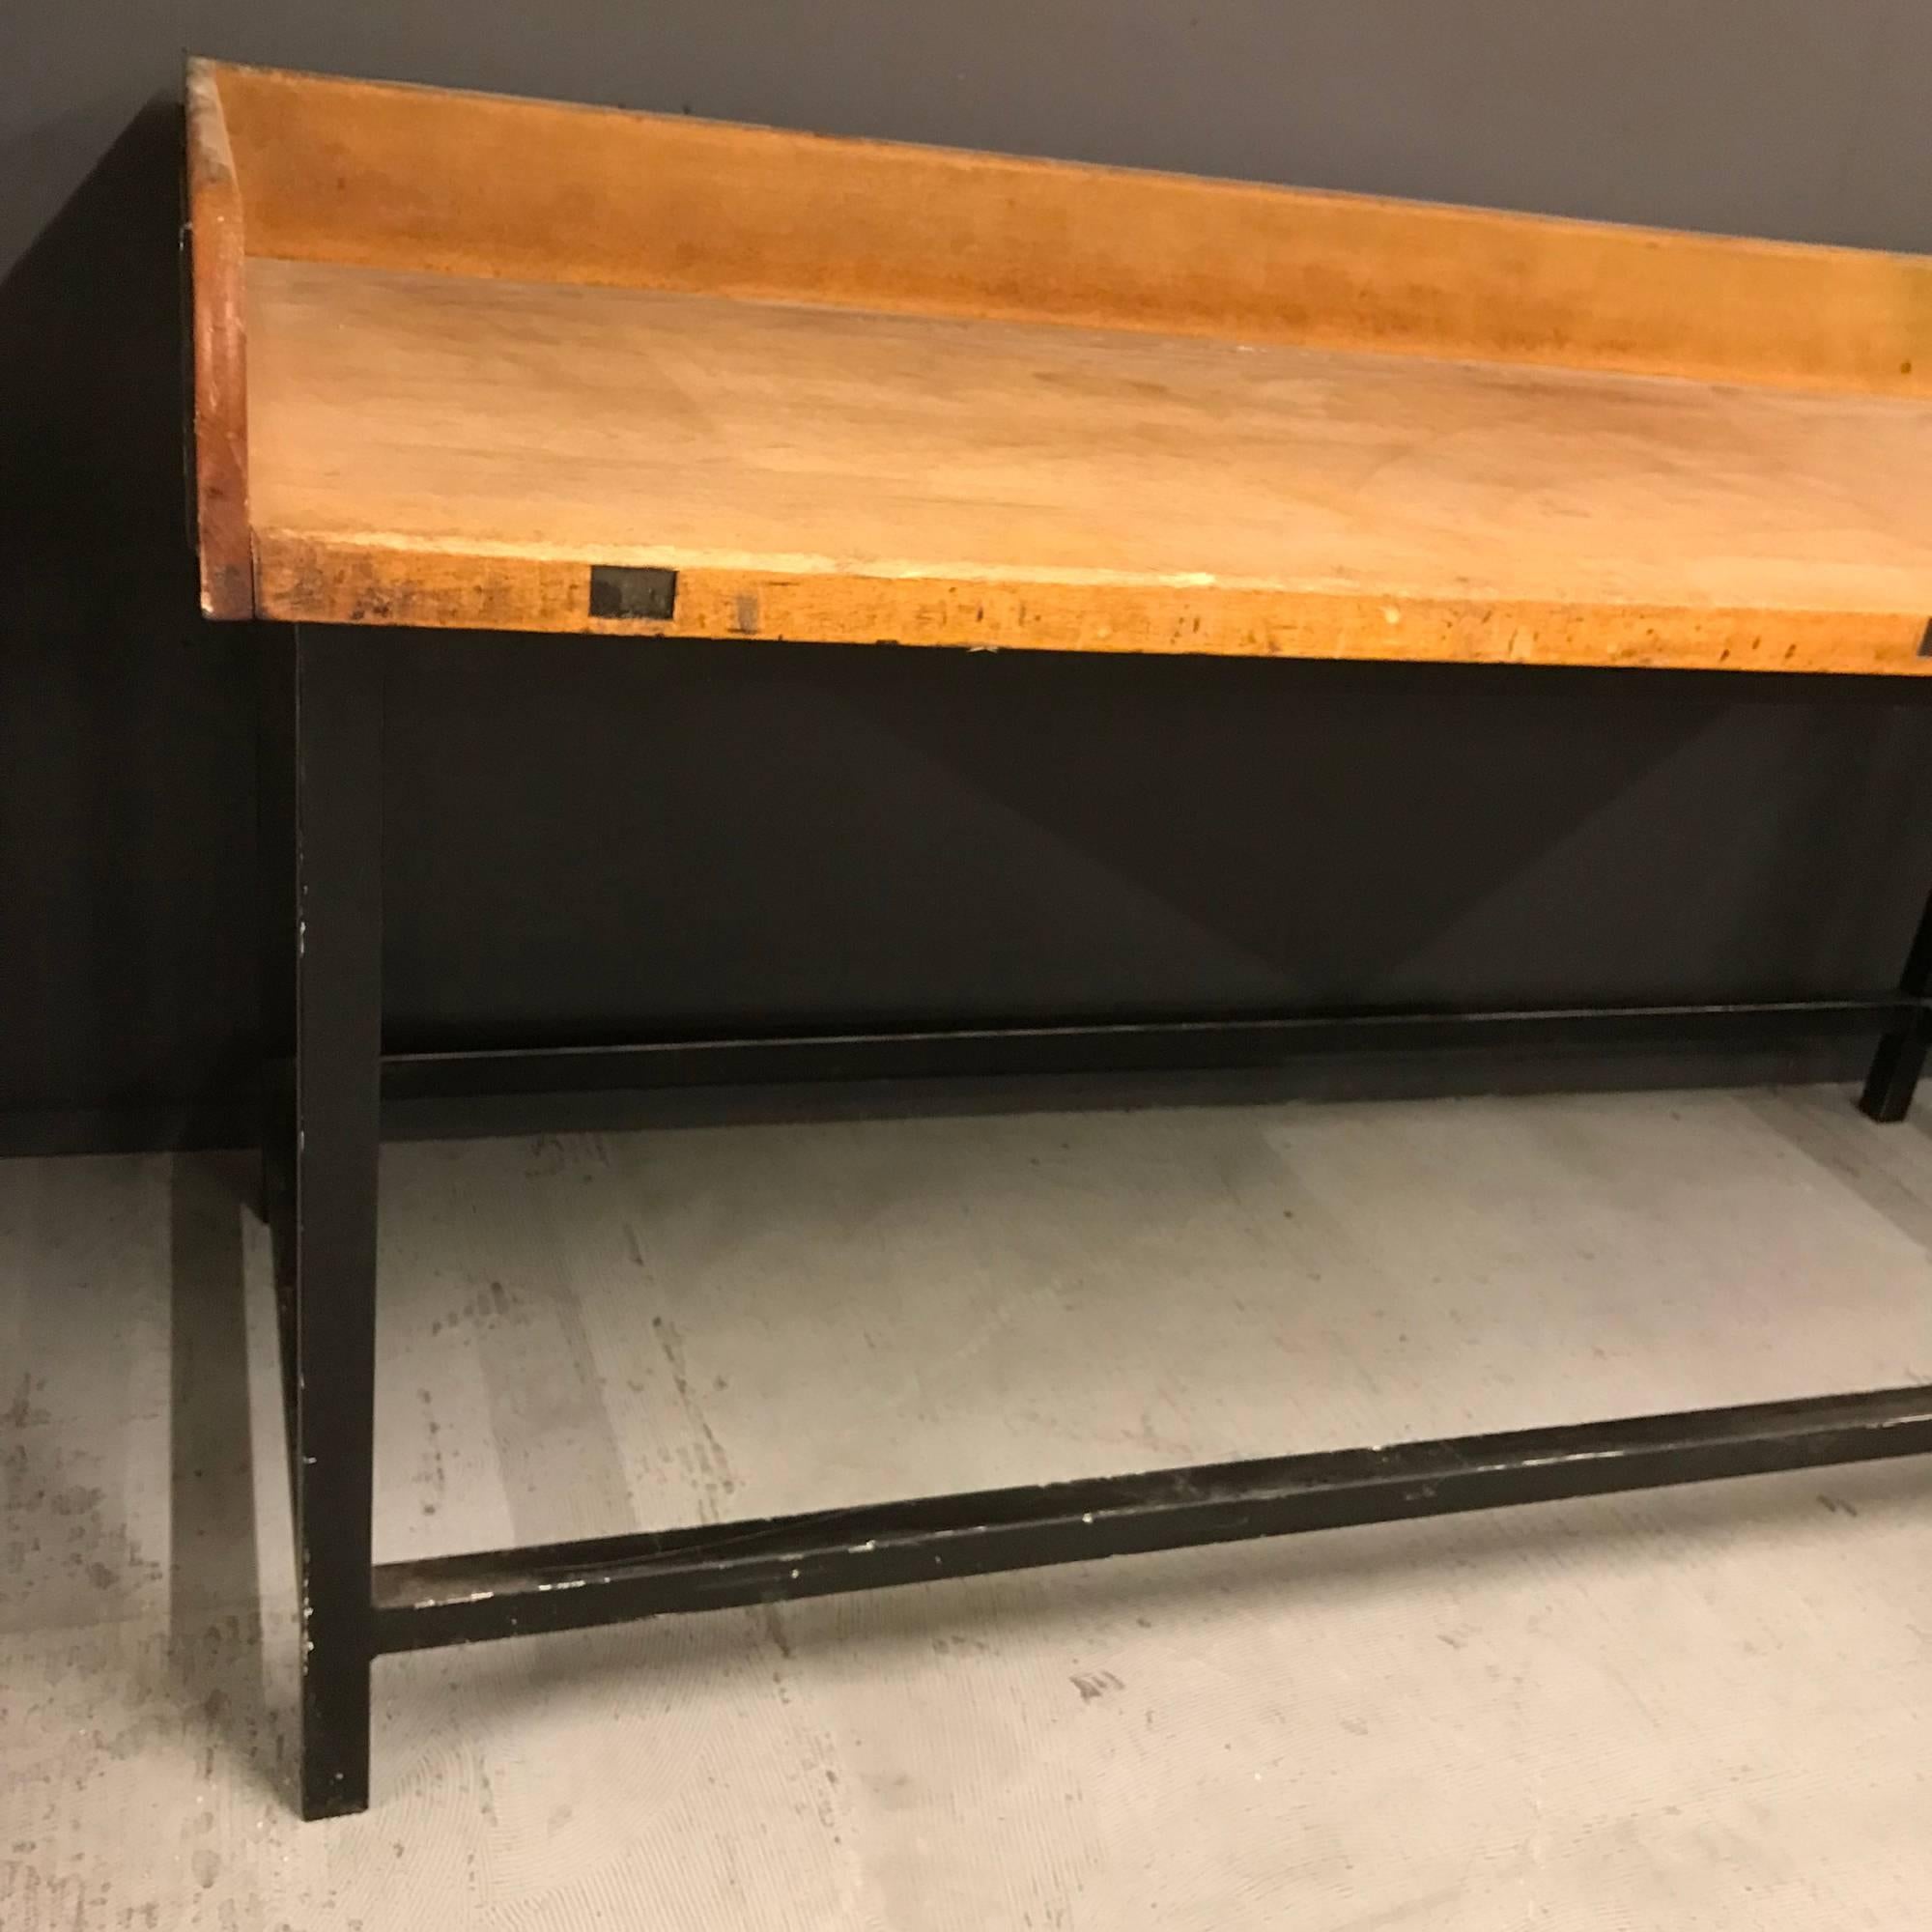 Vintage Bakery workbench with beech wooden top and black metal frame. With signs of use this workbench remains in good condition.